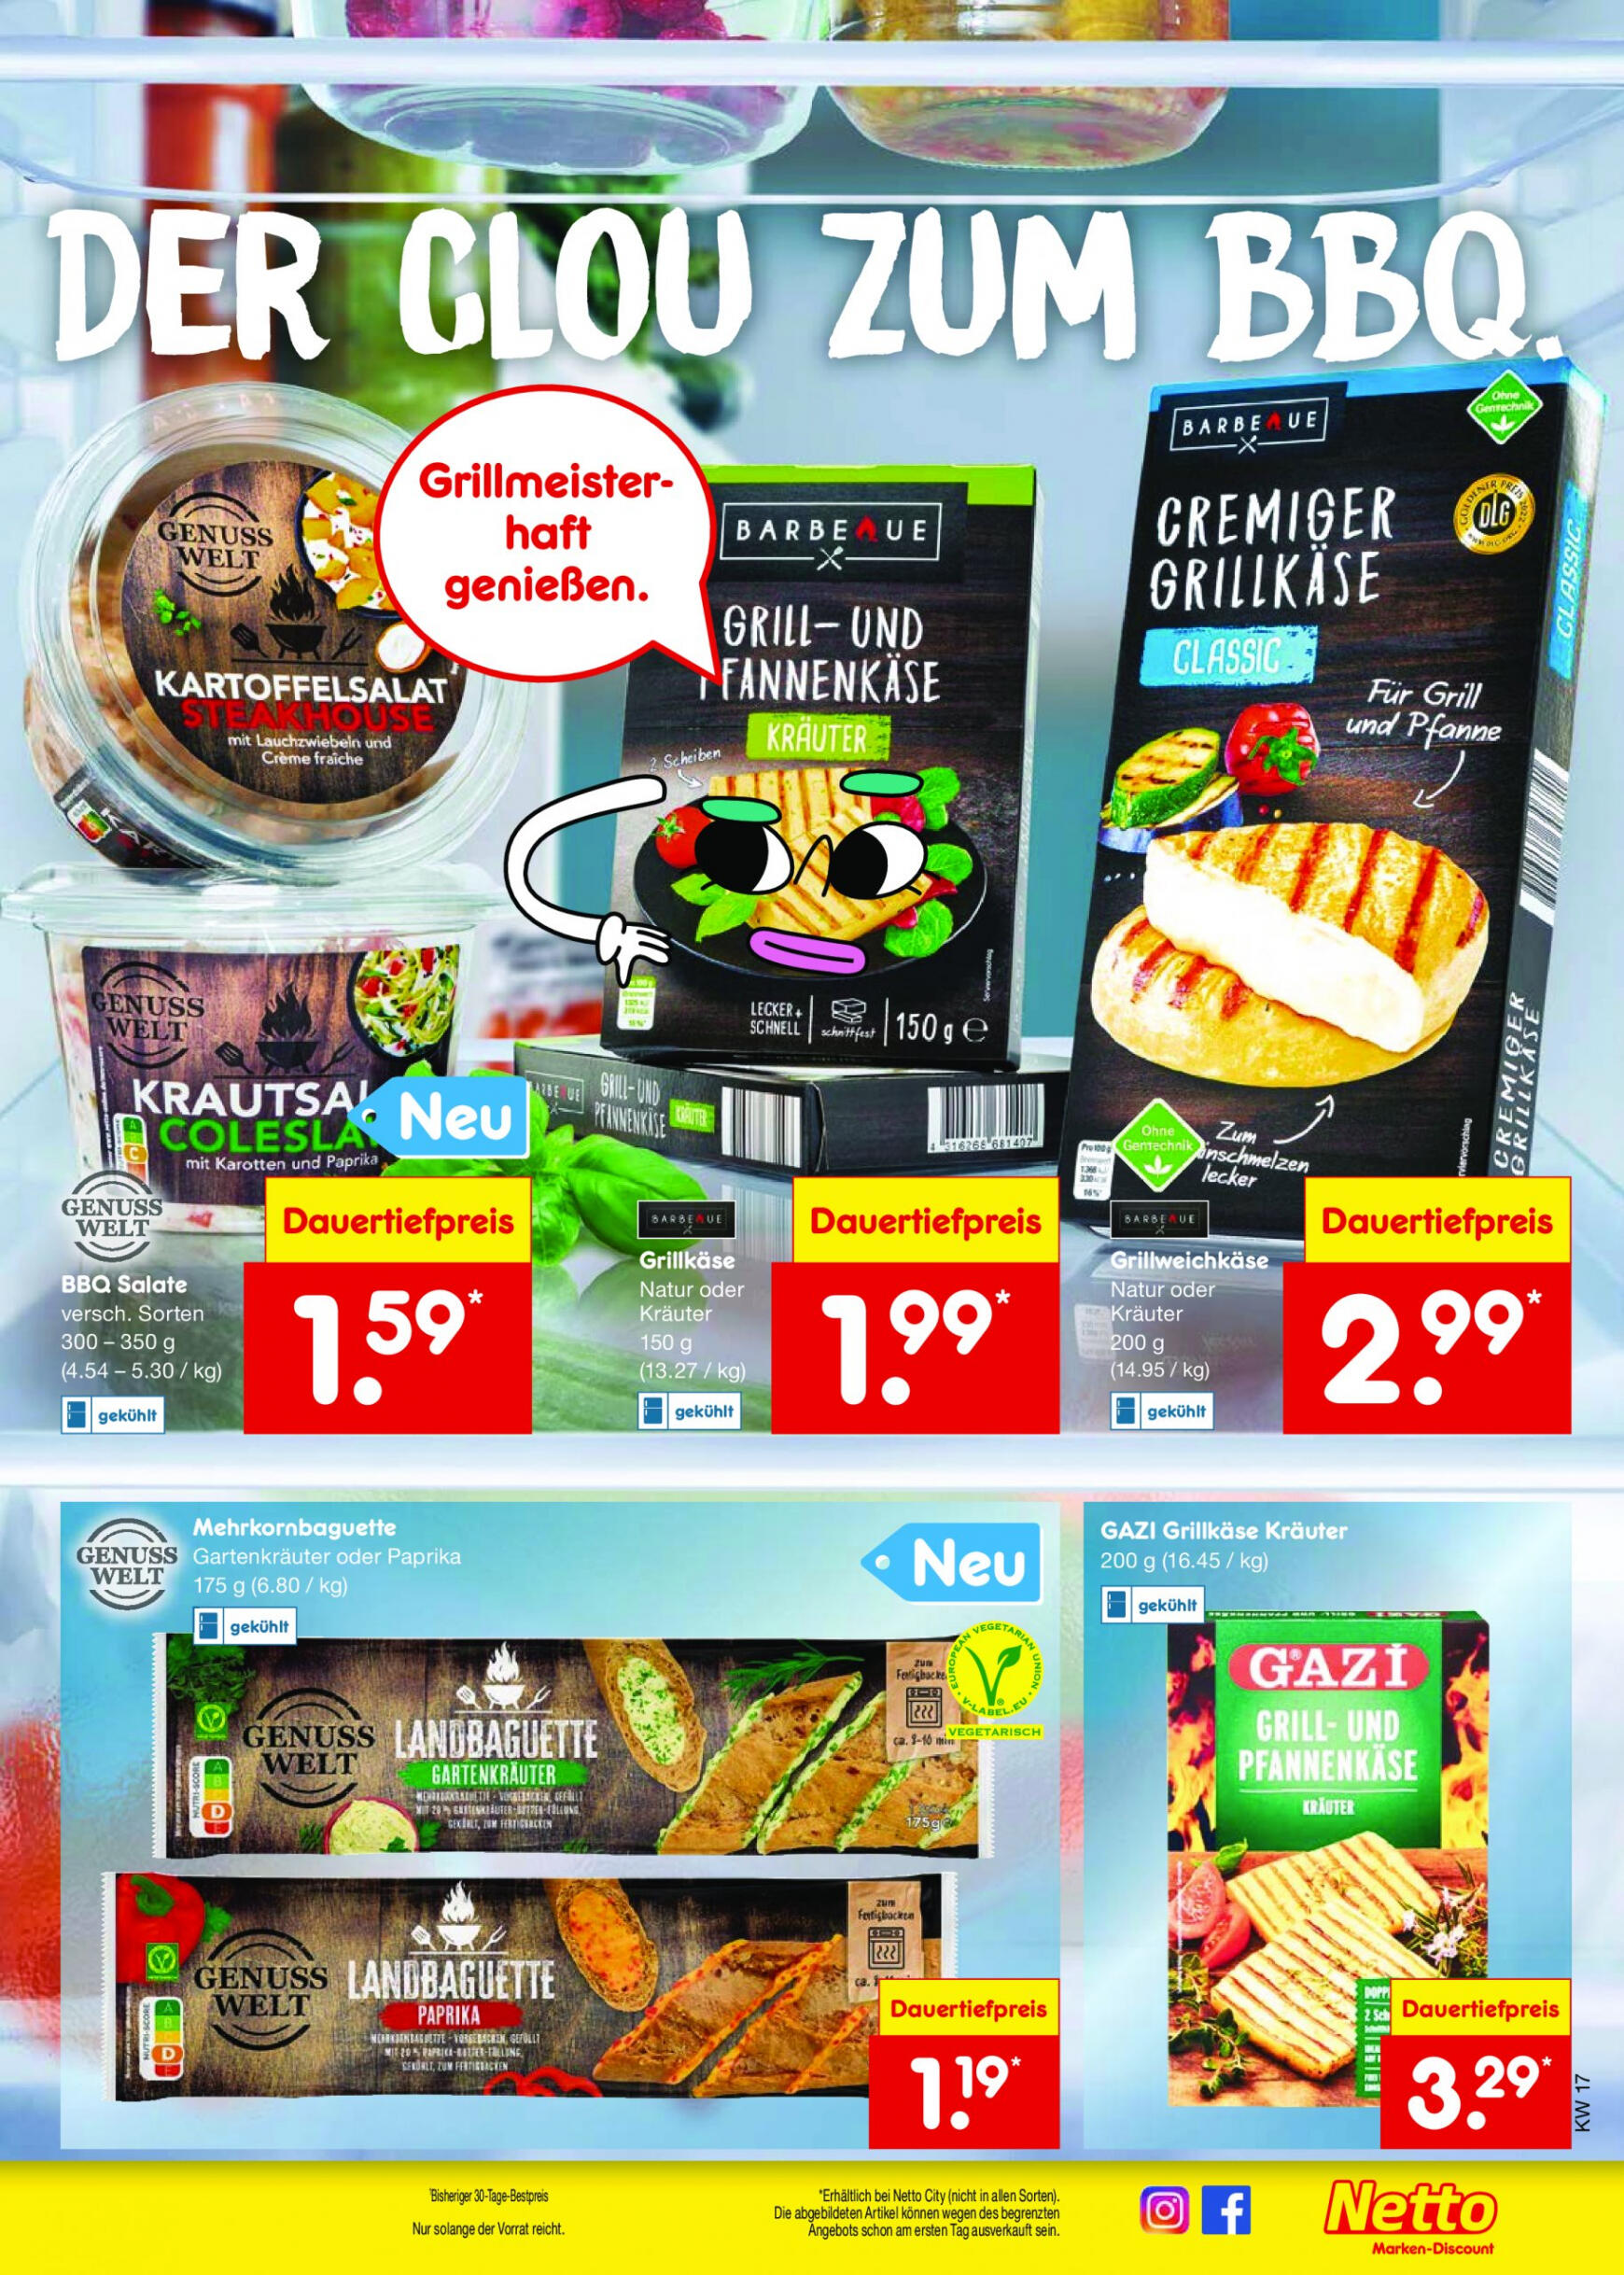 netto - Flyer Netto aktuell 22.04. - 27.04. - page: 15